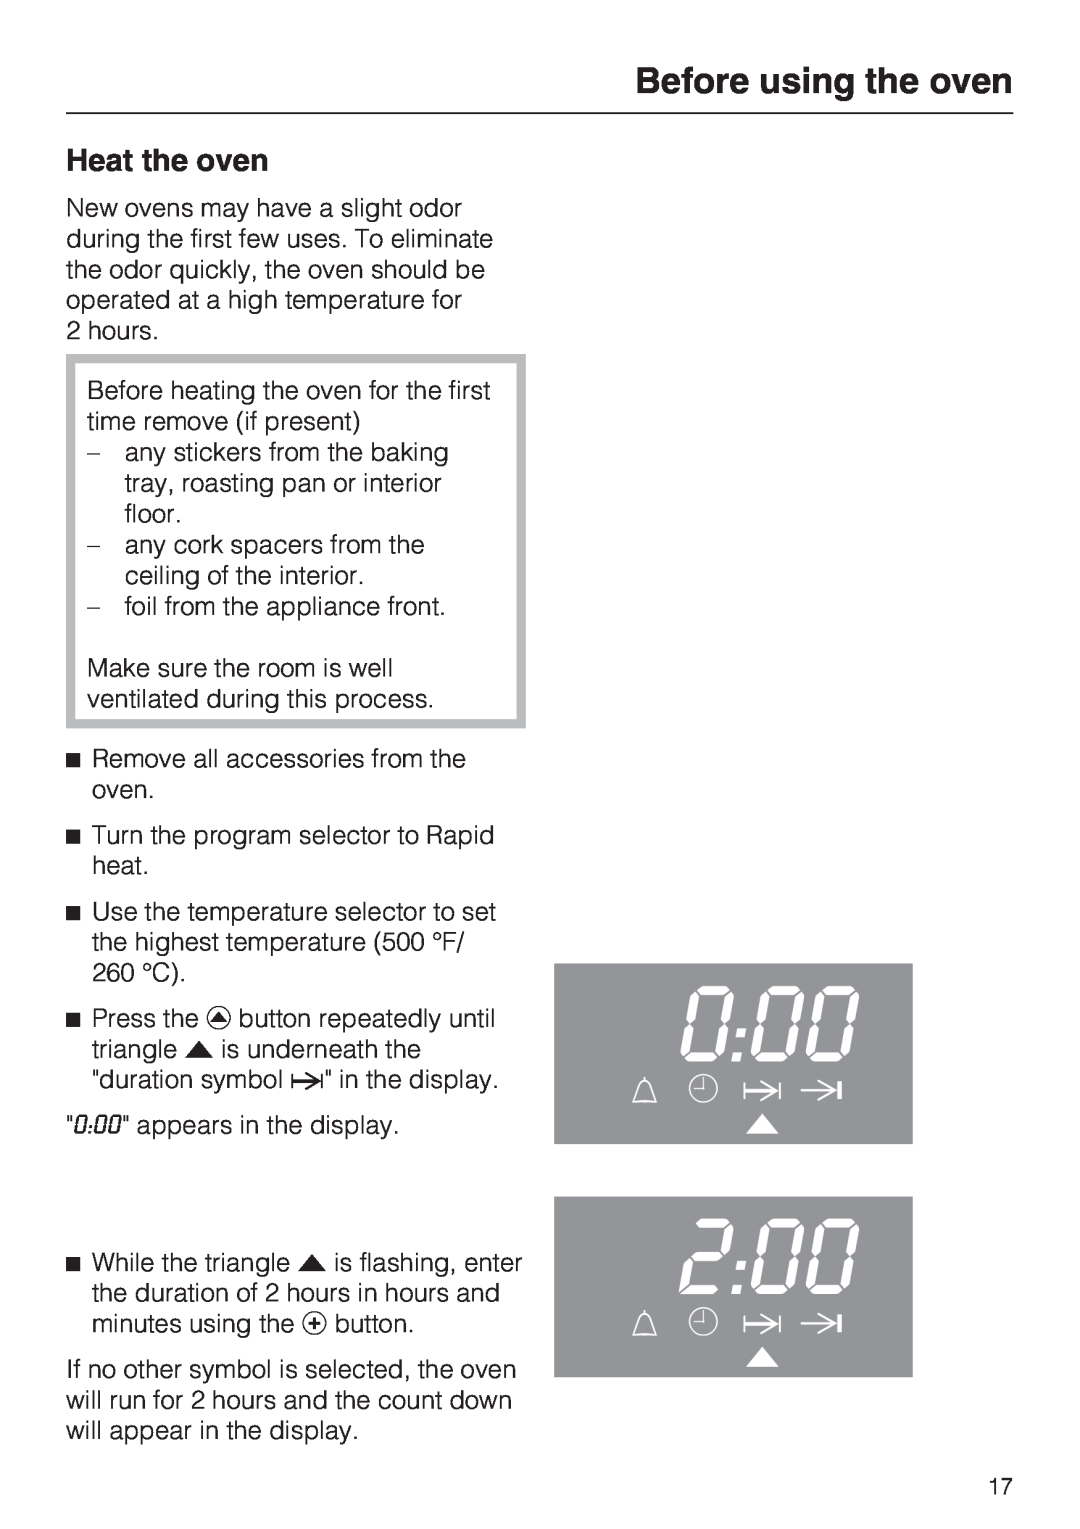 Miele H 4242 B installation instructions Heat the oven, Before using the oven 